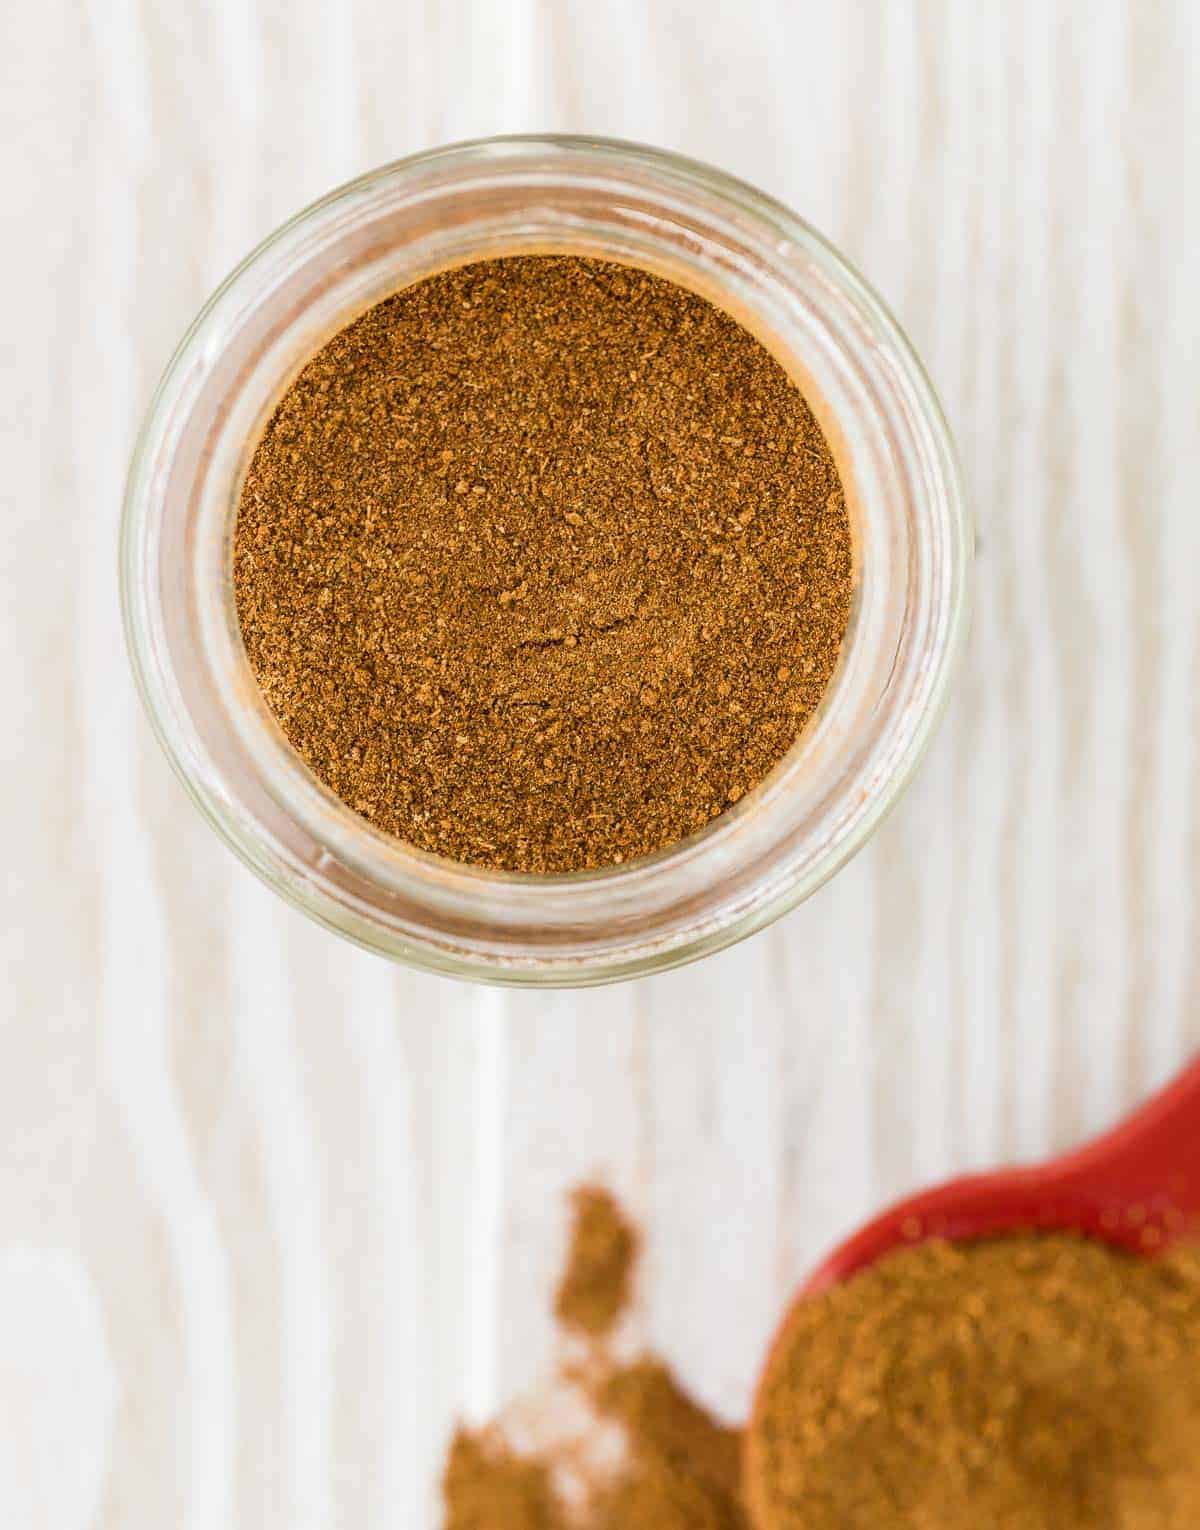 Overhead view of apple pie spice mix in a jar.